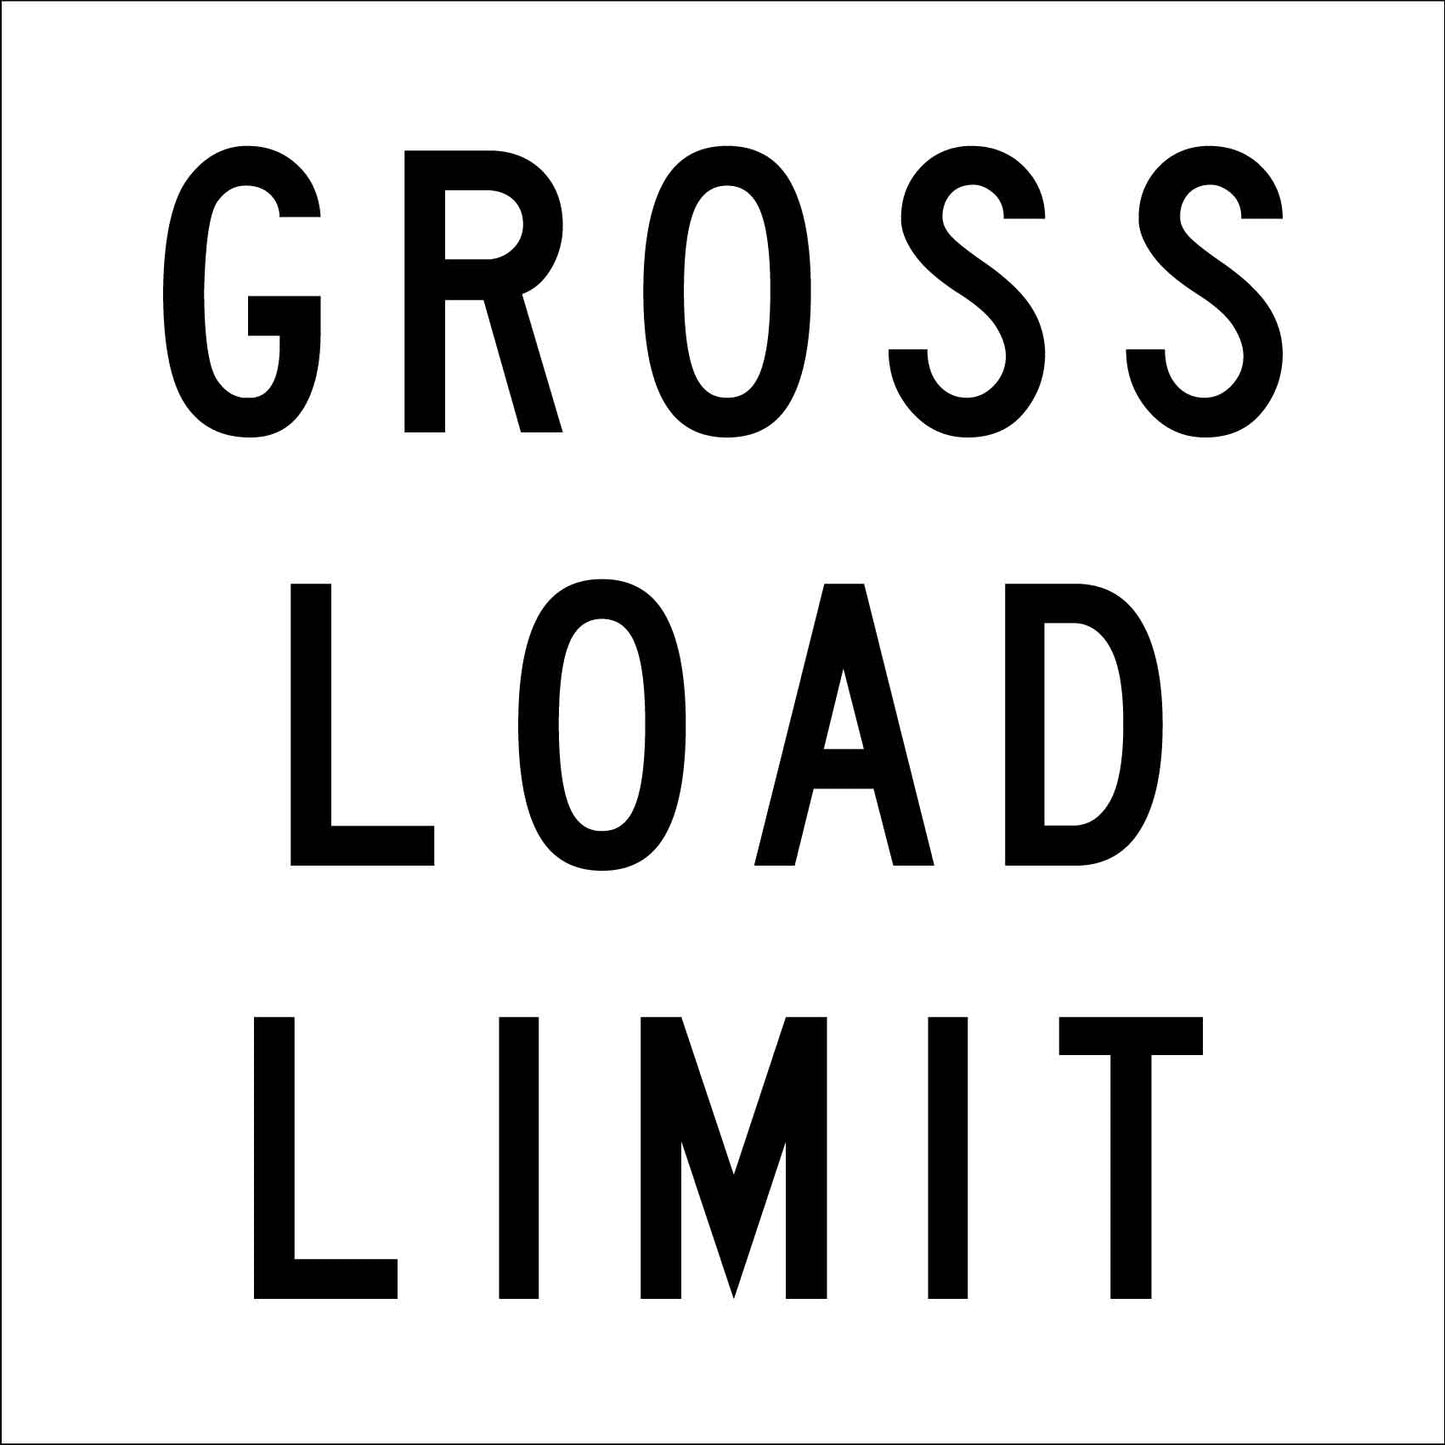 Gross Load Limit Multi Message Reflective Traffic Sign